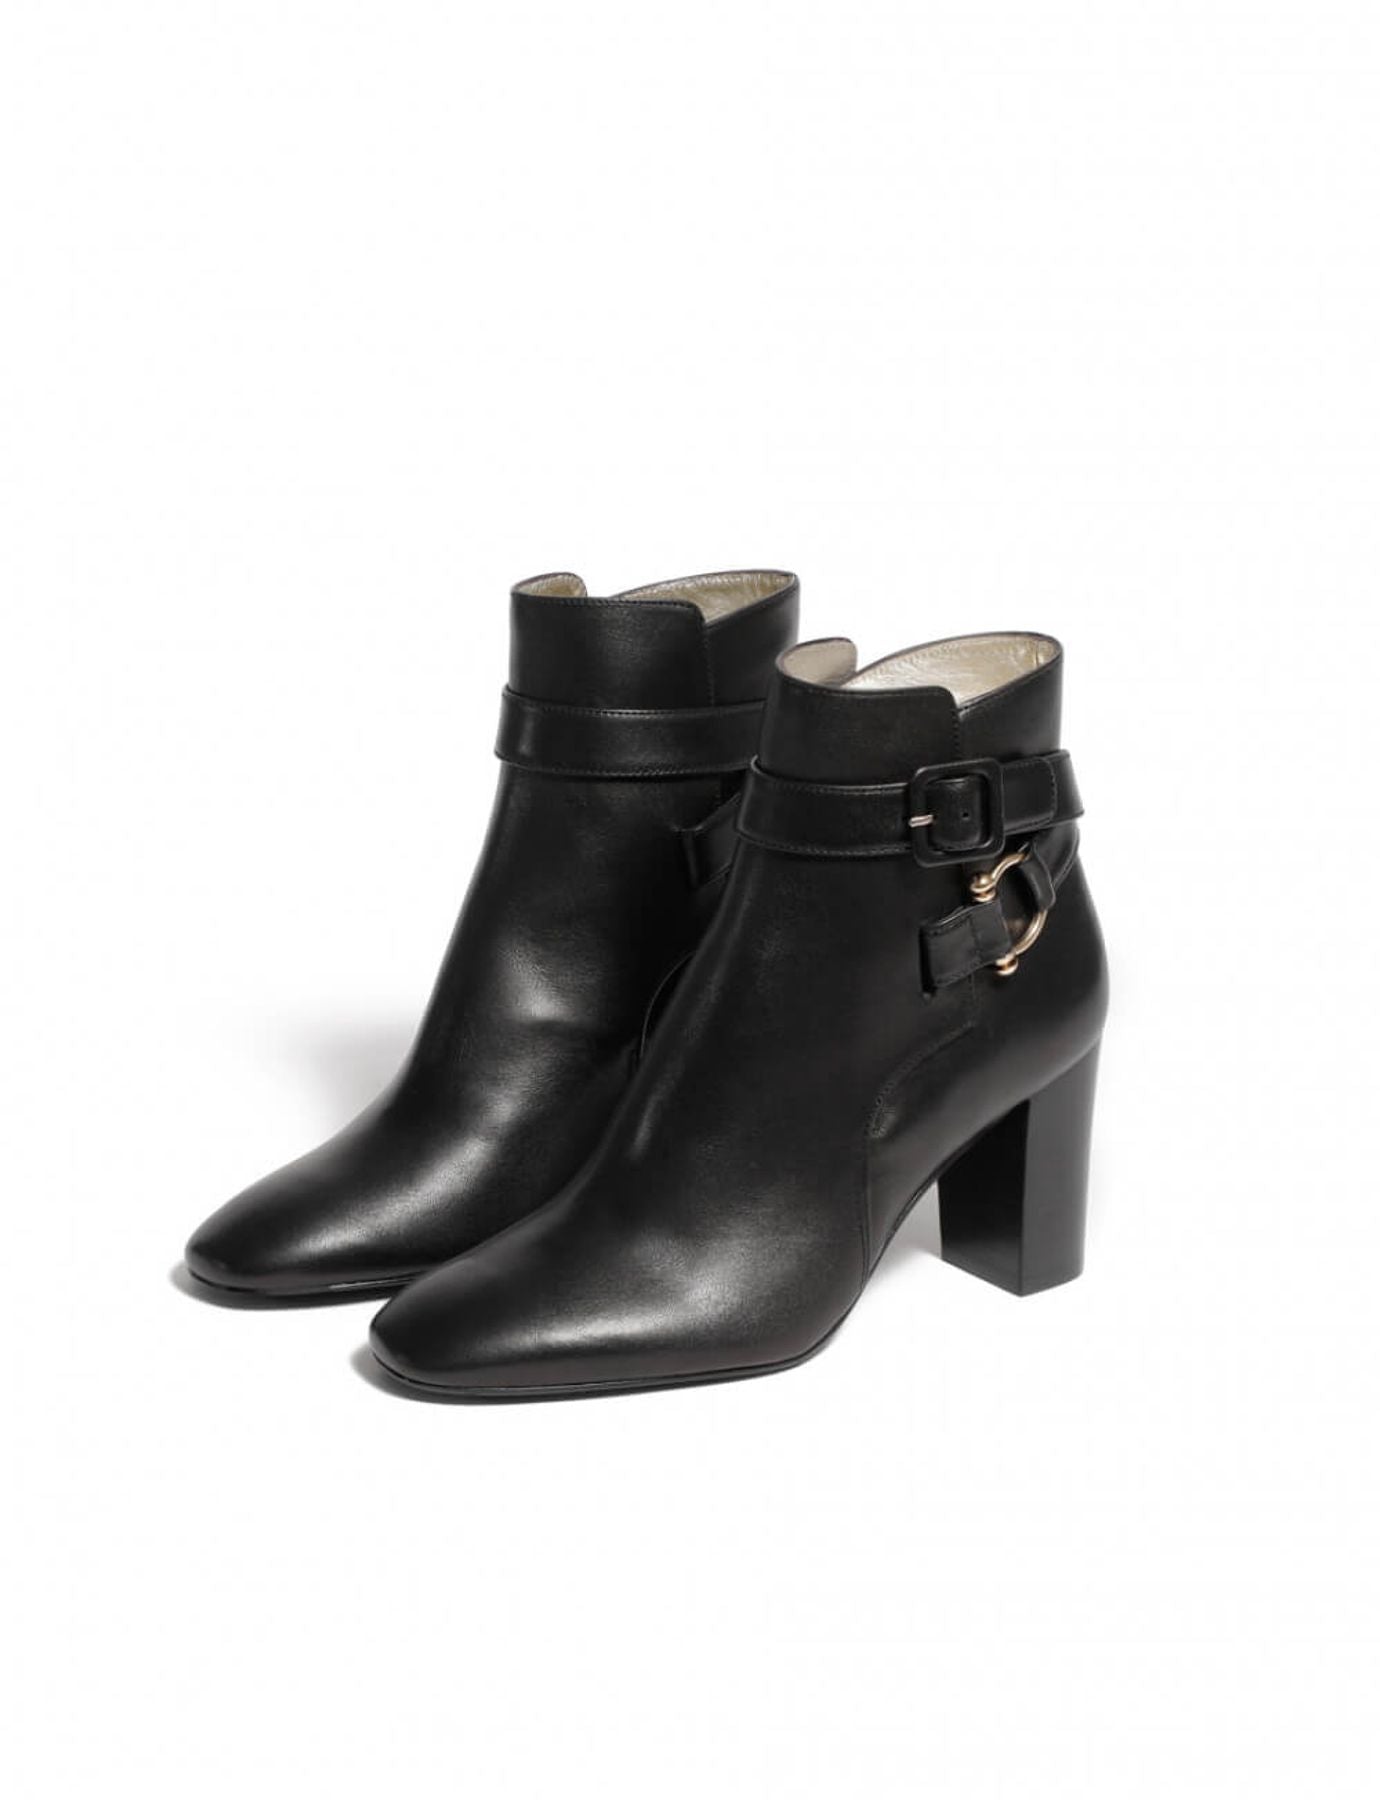 leather-black boots-betty-black